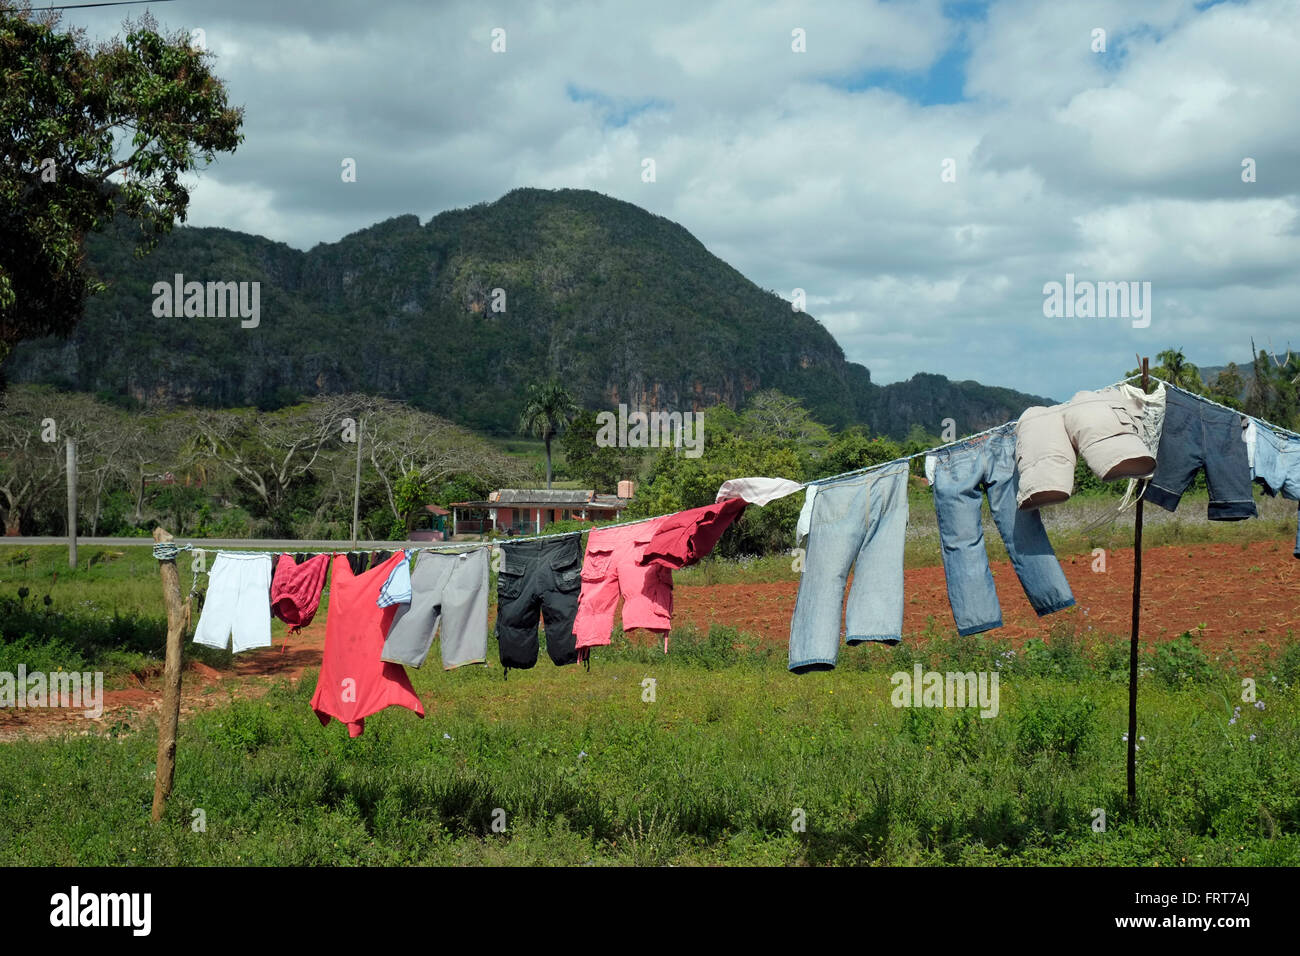 Laundry drying in the Vinales valley, Cuba. Stock Photo